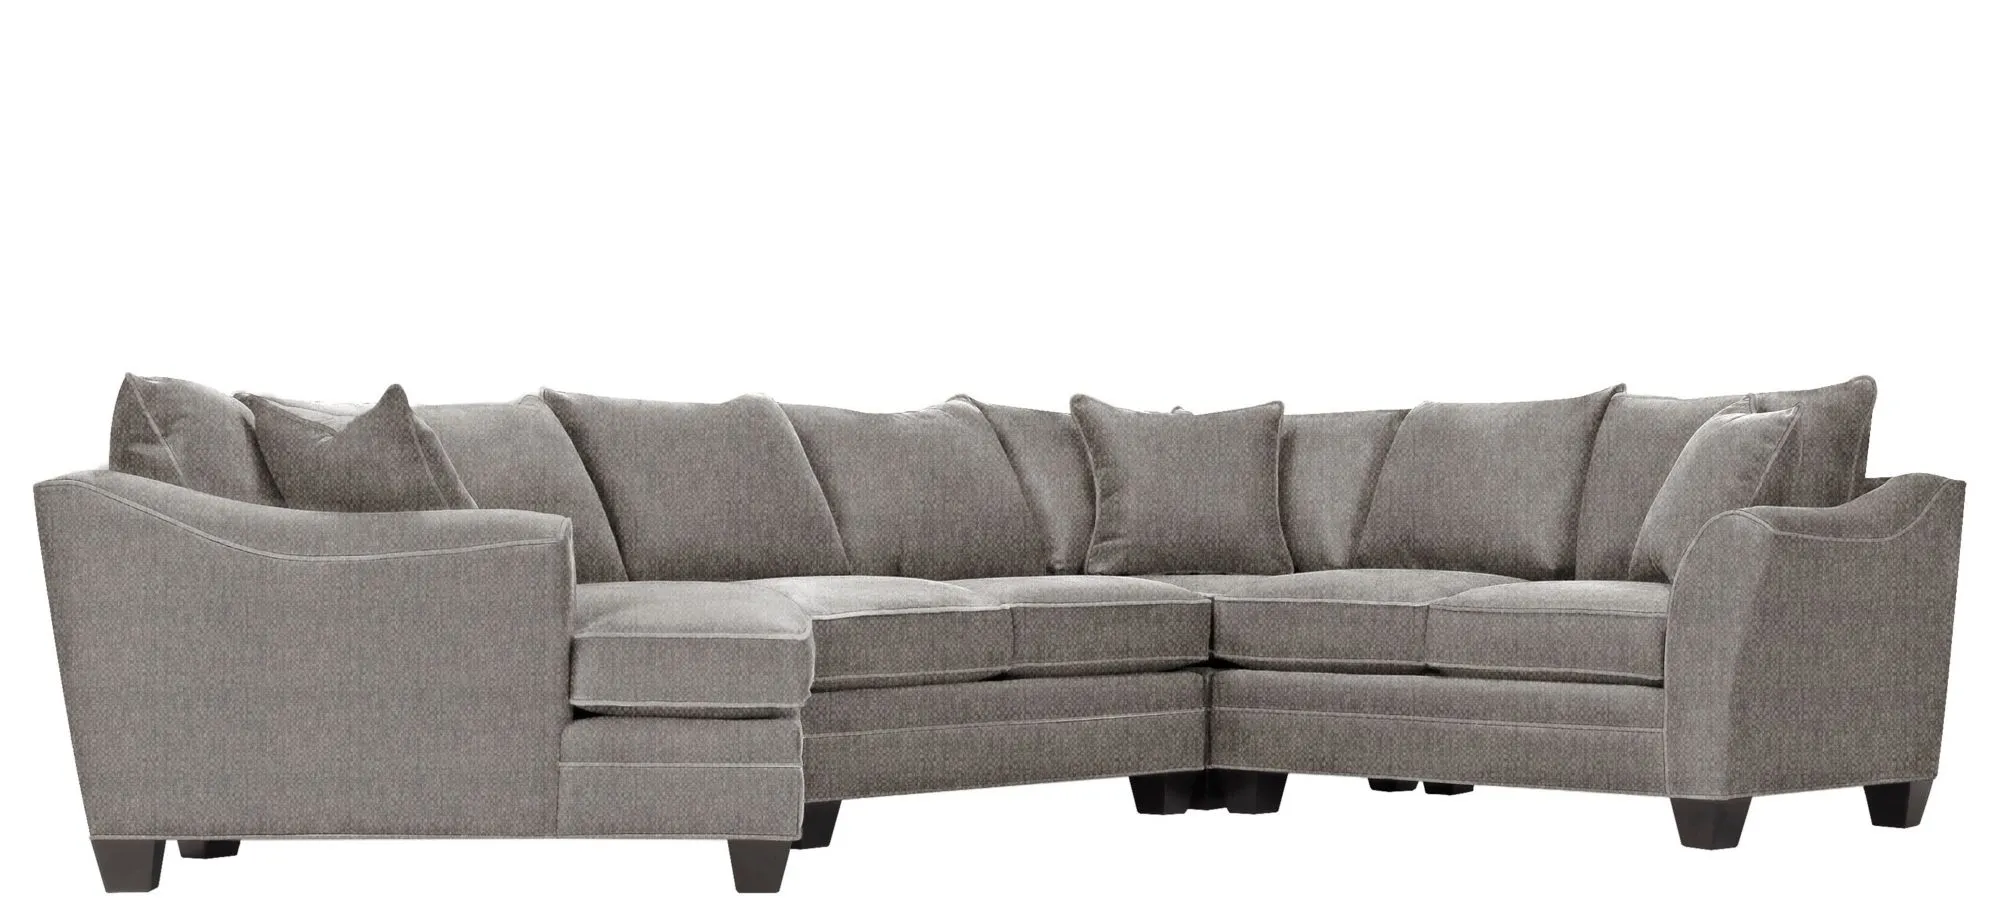 Foresthill 4-pc. Left Hand Cuddler with Loveseat Sectional Sofa in Sugar Shack Stone by H.M. Richards